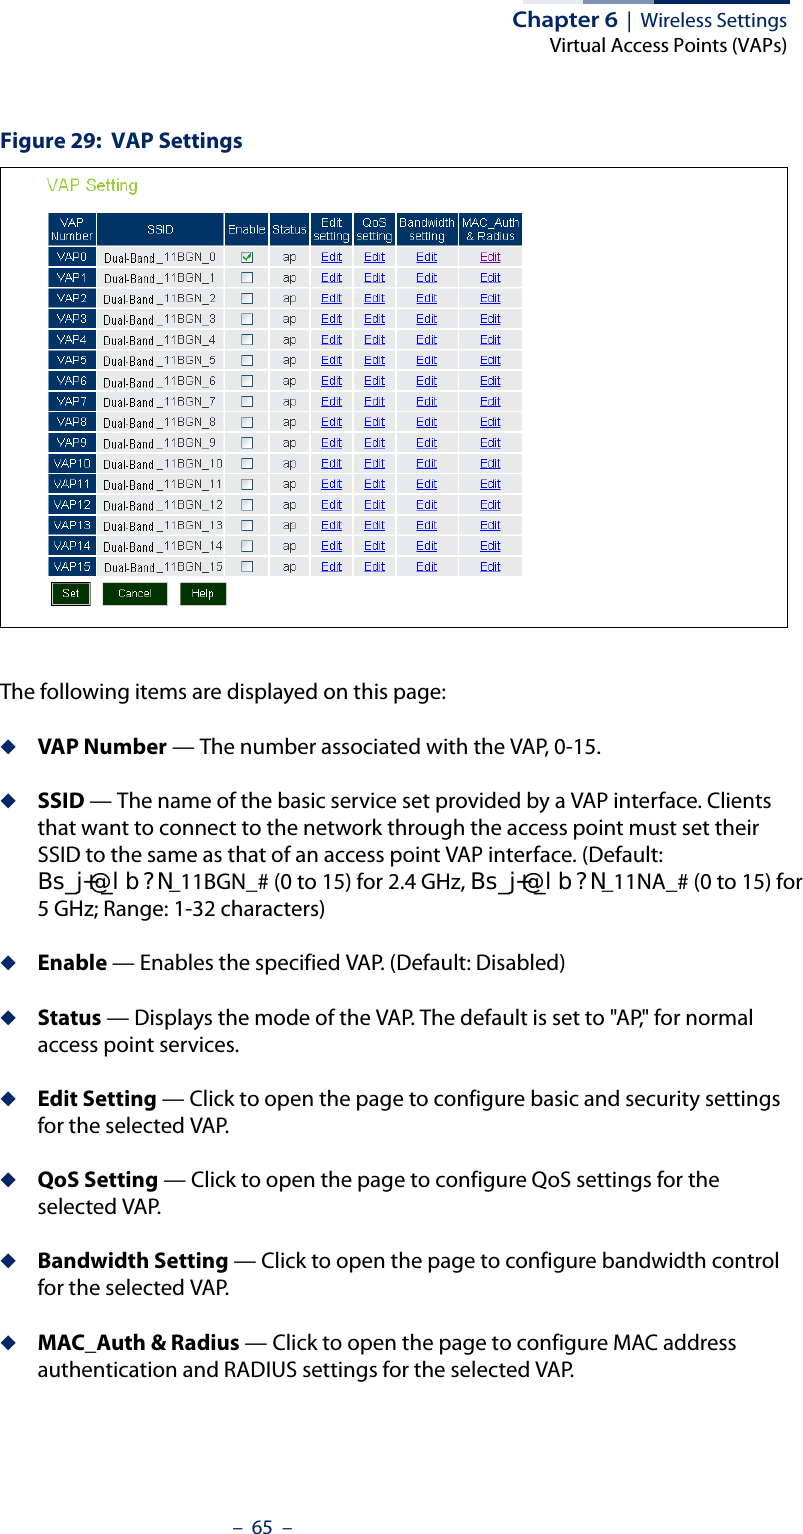 Chapter 6  |  Wireless SettingsVirtual Access Points (VAPs)–  65  –Figure 29:  VAP SettingsThe following items are displayed on this page:◆VAP Number — The number associated with the VAP, 0-15.◆SSID — The name of the basic service set provided by a VAP interface. Clients that want to connect to the network through the access point must set their SSID to the same as that of an access point VAP interface. (Default: %VBM#BOE&quot;1_11BGN_# (0 to 15) for 2.4 GHz, %VBM#BOE&quot;1_11NA_# (0 to 15) for 5GHz; Range: 1-32 characters)◆Enable — Enables the specified VAP. (Default: Disabled)◆Status — Displays the mode of the VAP. The default is set to &quot;AP,&quot; for normal access point services. ◆Edit Setting — Click to open the page to configure basic and security settings for the selected VAP.◆QoS Setting — Click to open the page to configure QoS settings for the selected VAP.◆Bandwidth Setting — Click to open the page to configure bandwidth control for the selected VAP.◆MAC_Auth &amp; Radius — Click to open the page to configure MAC address authentication and RADIUS settings for the selected VAP.